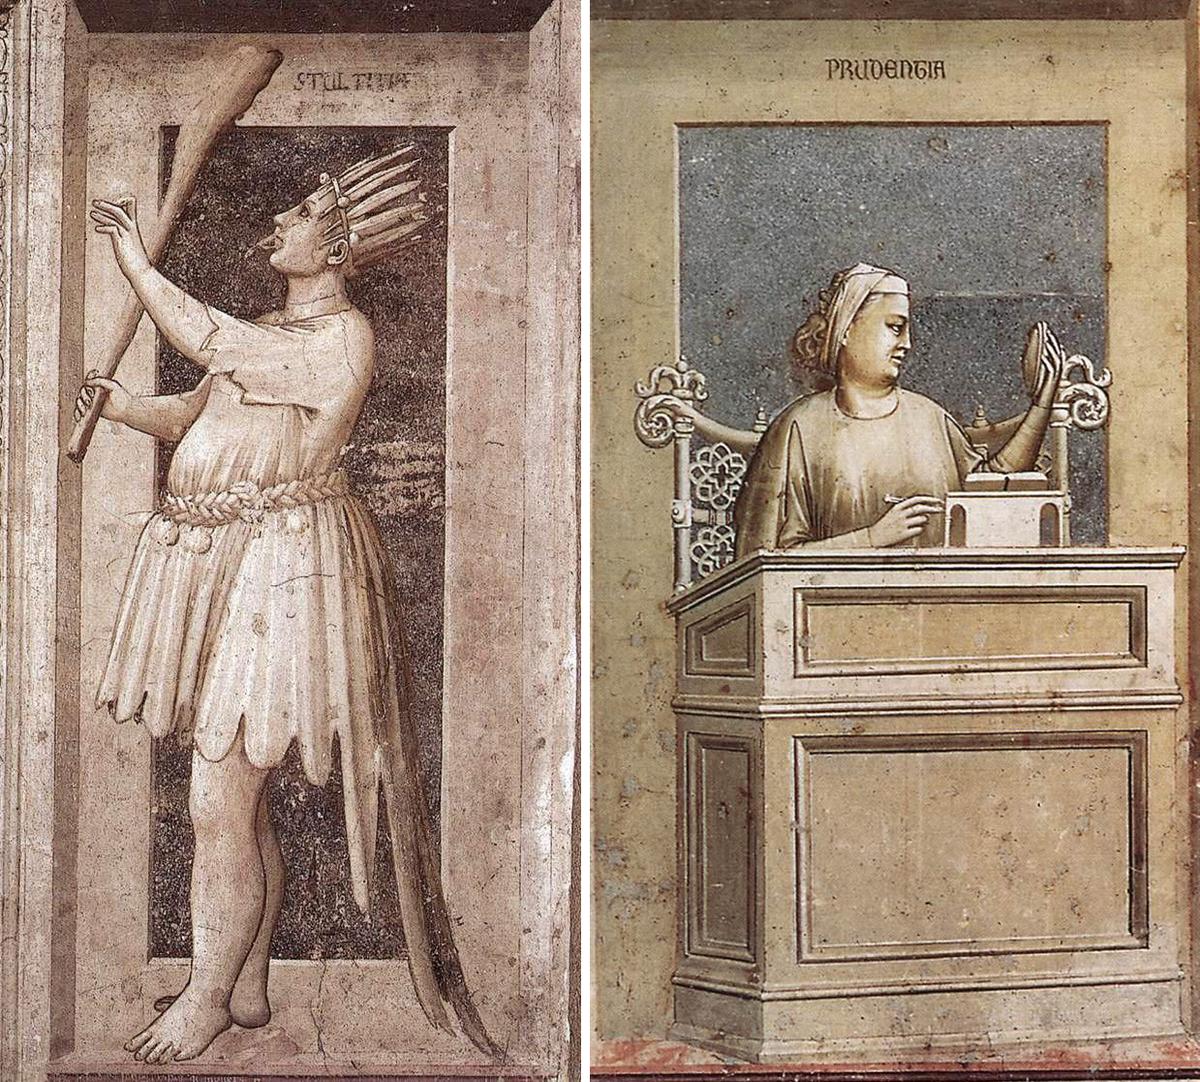 Folly (L) and Prudence from Giotto's seven vices and virtues. (Public Domain)